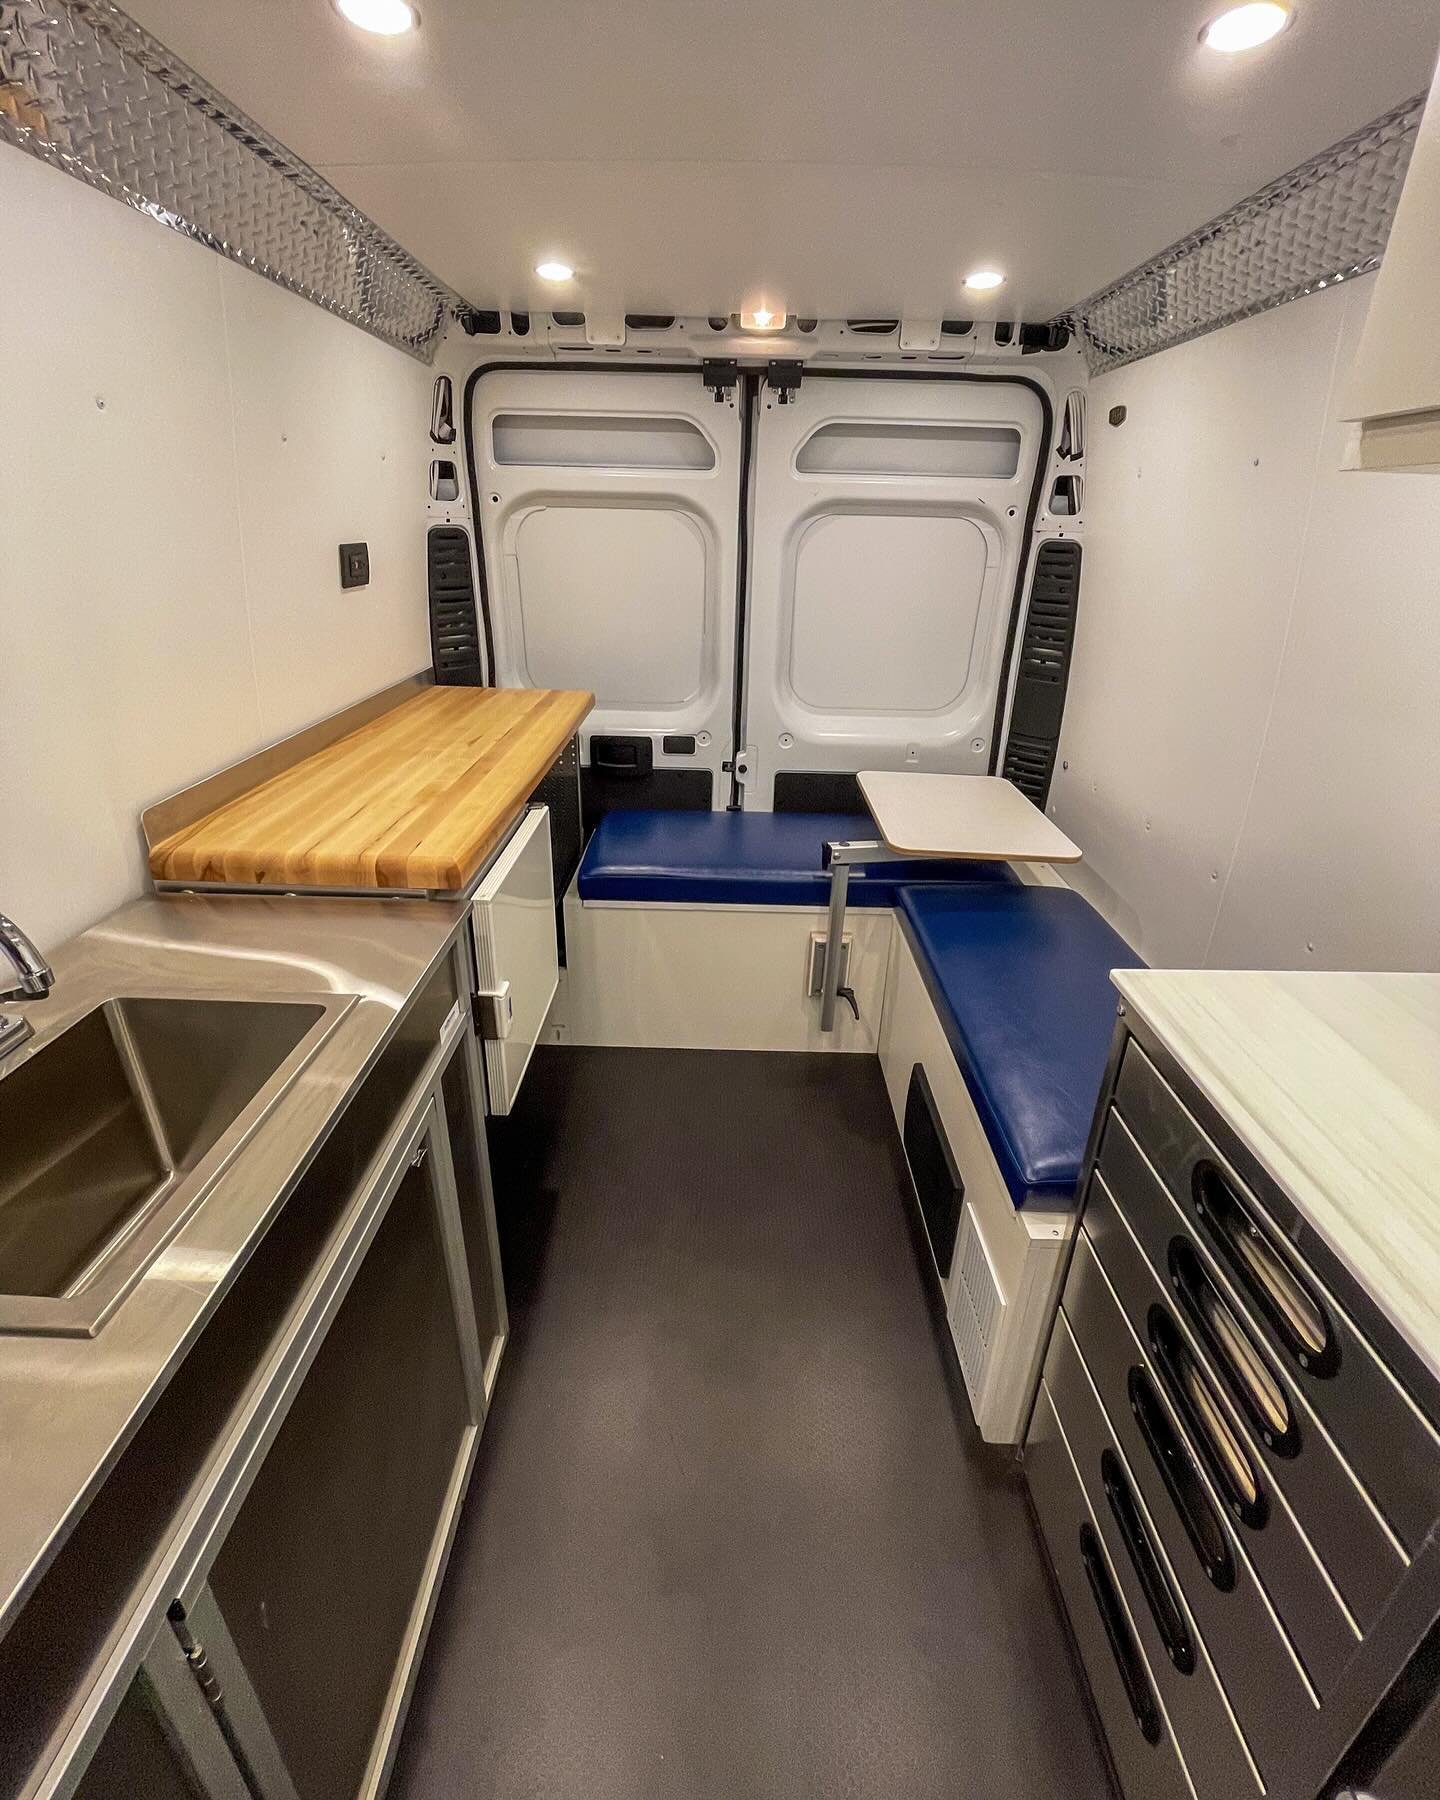 Nirvana Upfitters builds more than just camper vans! 
We recently completed a mobile medical clinic for Women and Children through the Rhode Island state WIC program. 
Swipe for more pics of this build!

#vanbuild #vanbuilders #vanconversion #medical